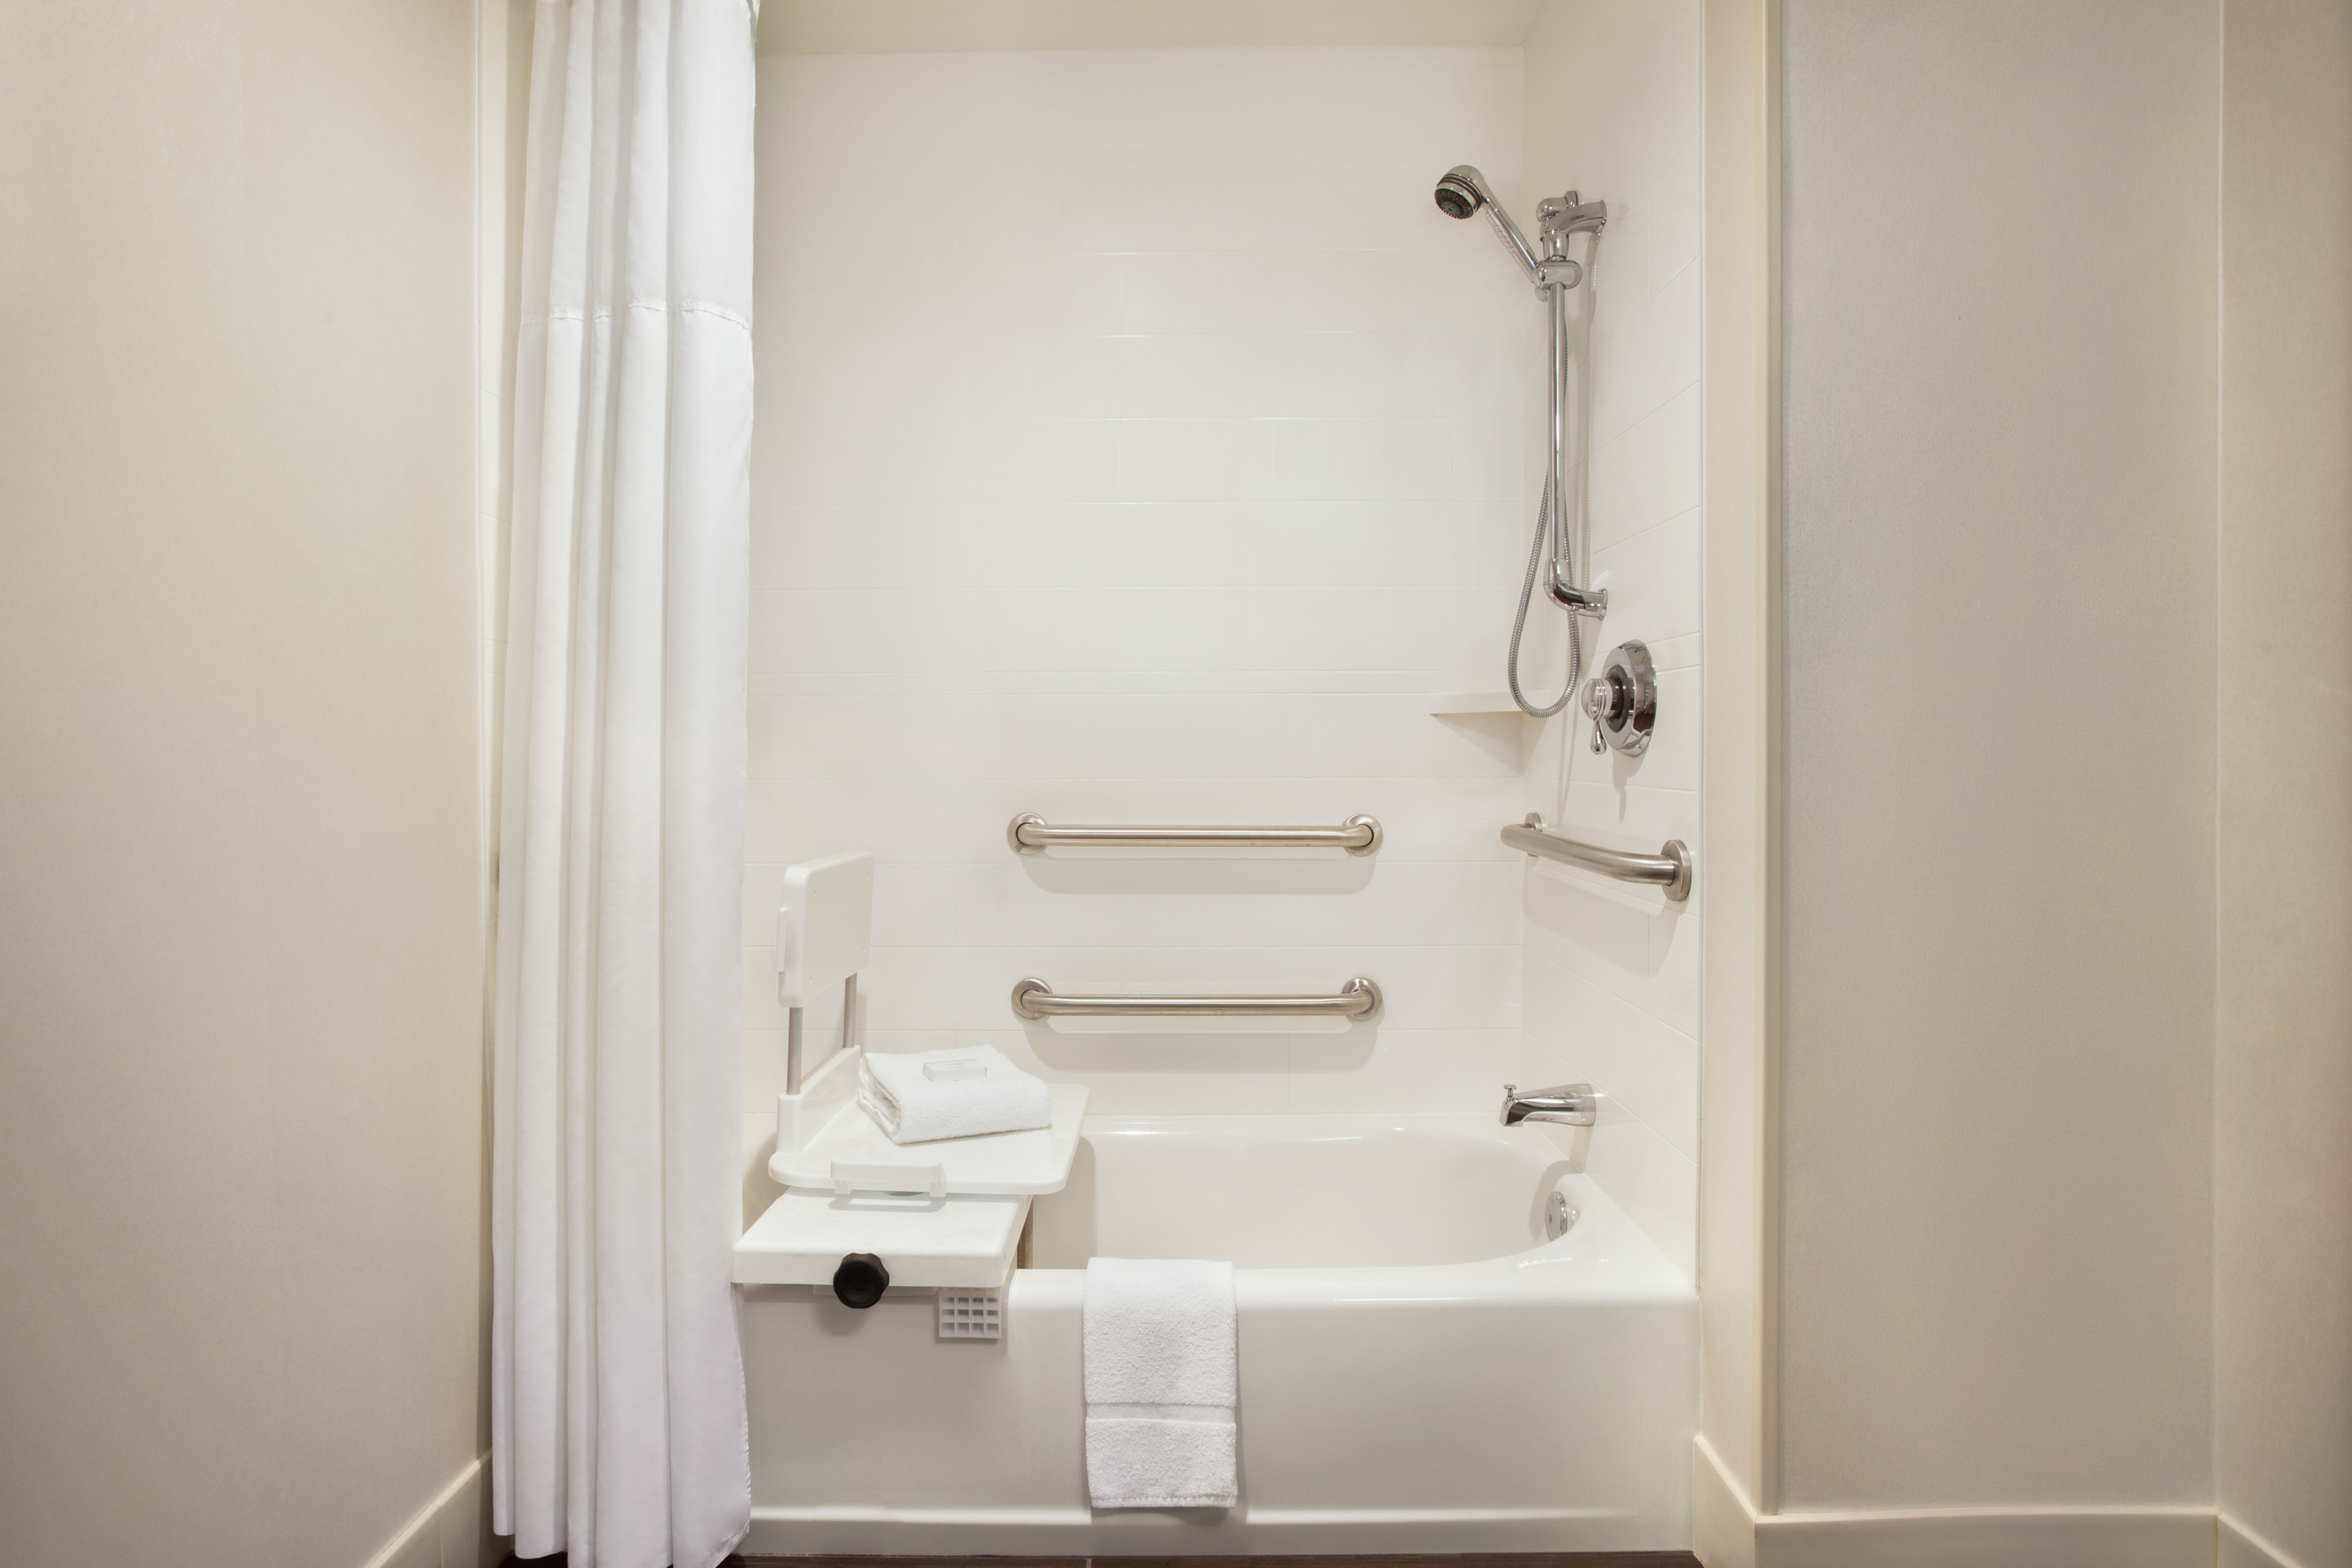 Spacious accessible tub featuring seat, grab bars, and lowered shower head.